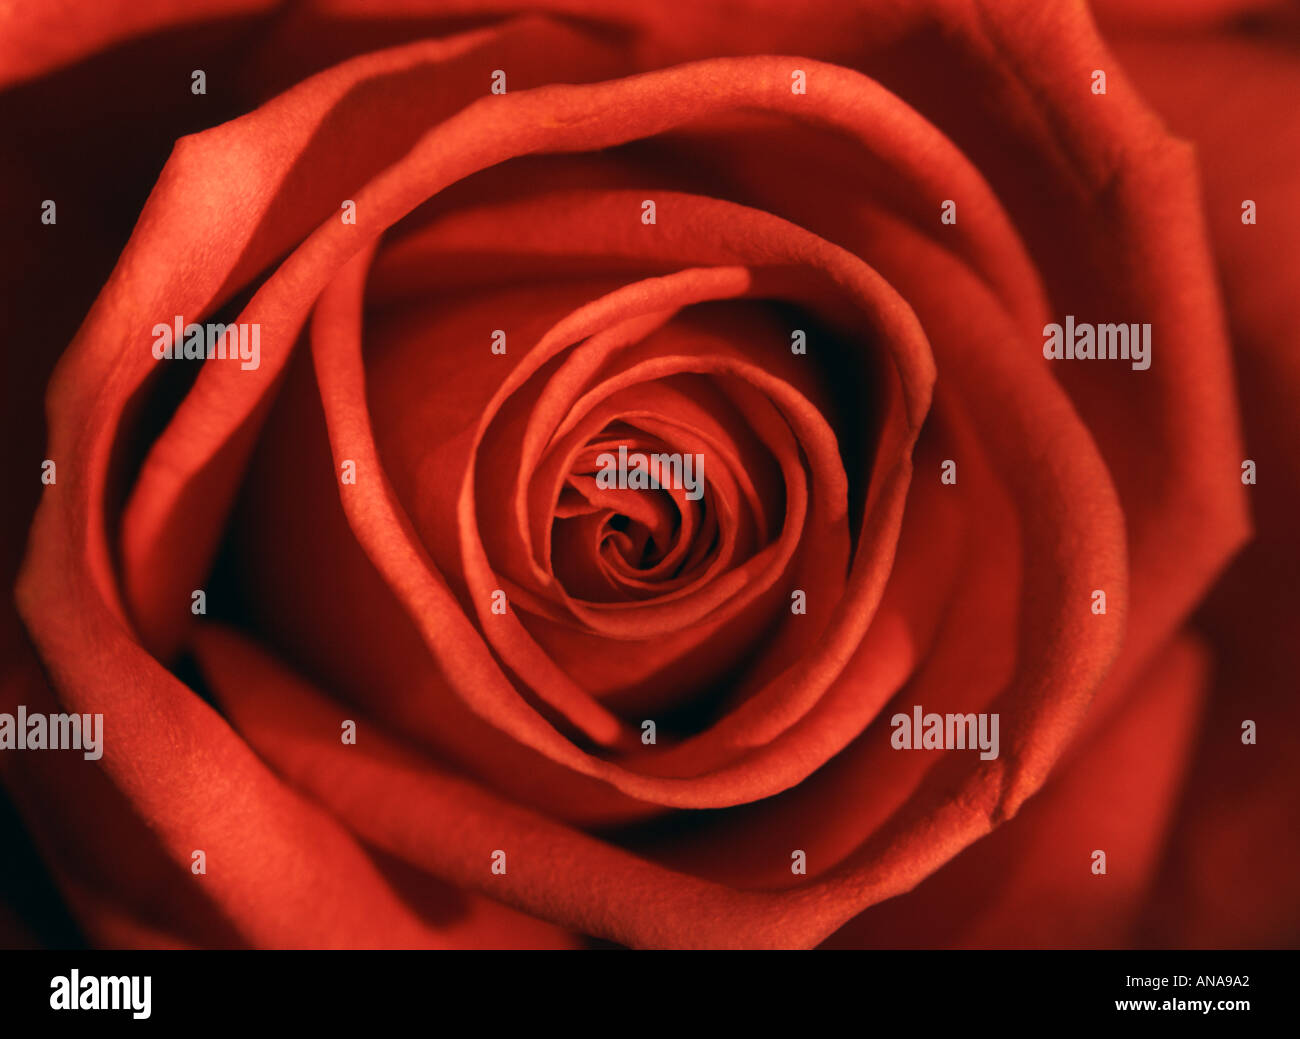 Single red rose close up Stock Photo